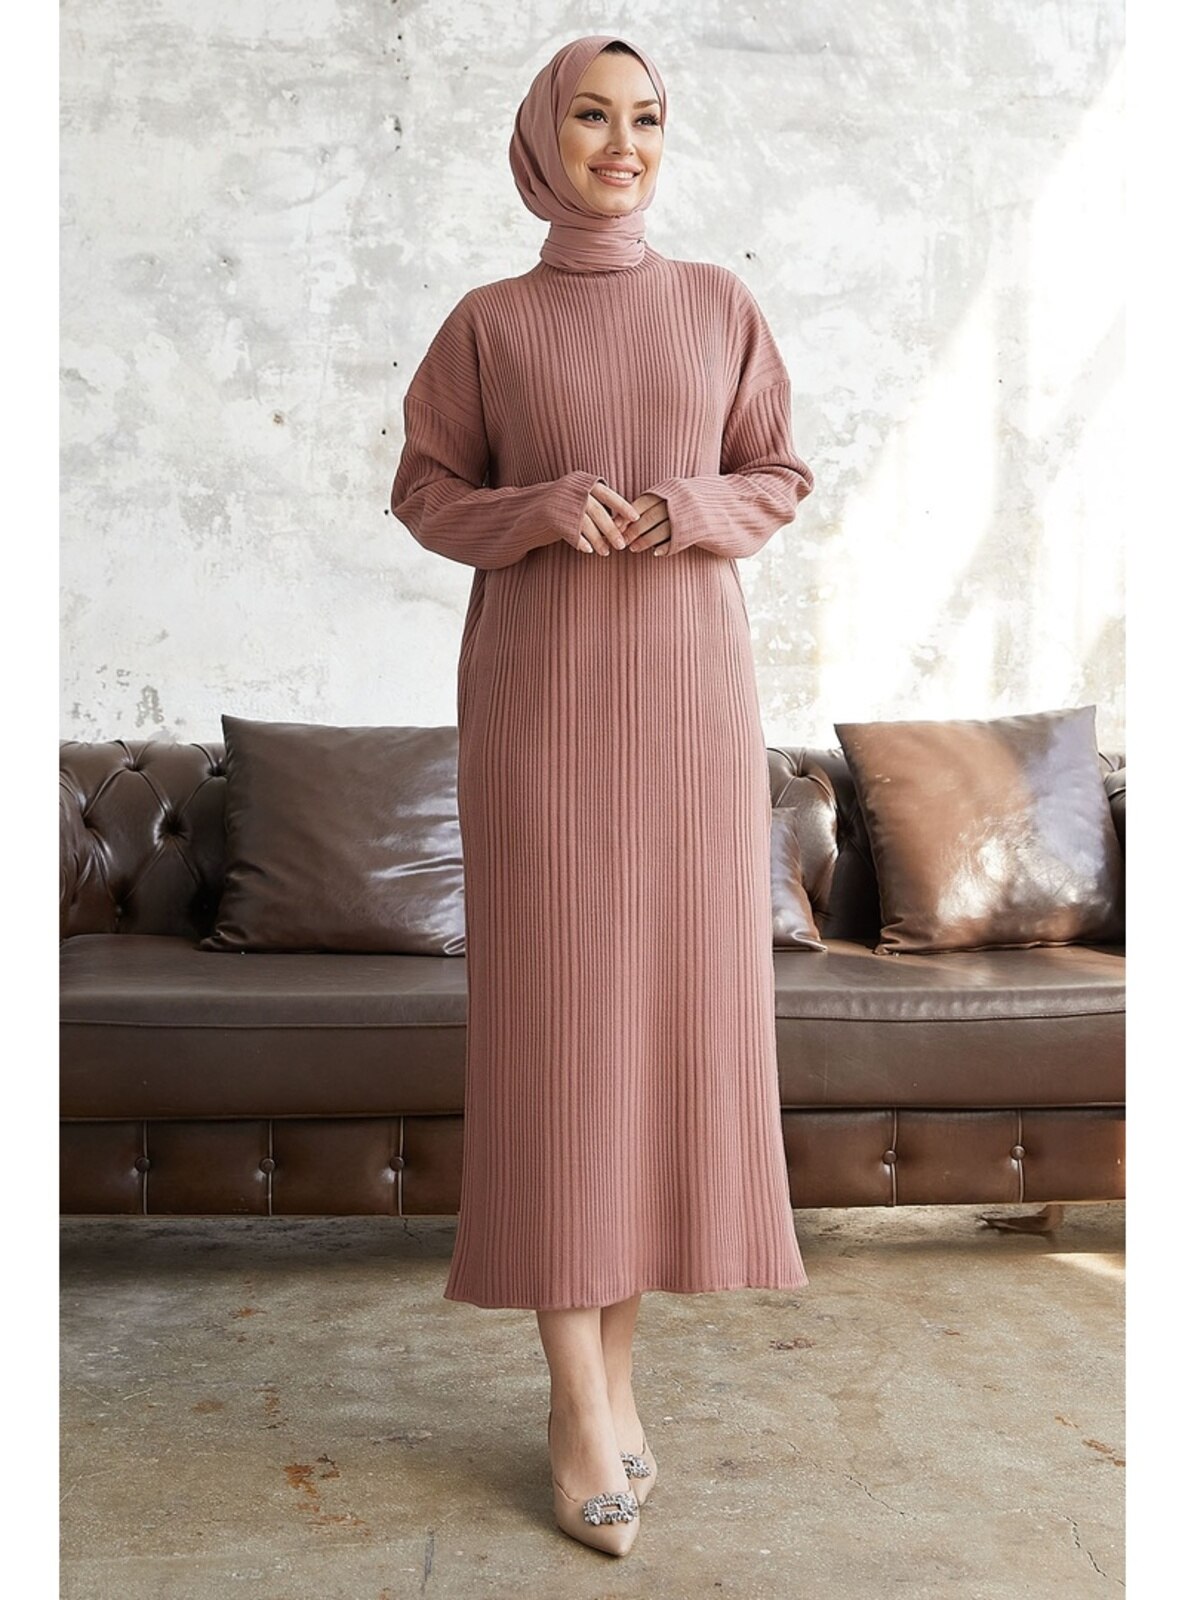 Dusty Rose - Unlined - Polo neck - Knit Dresses